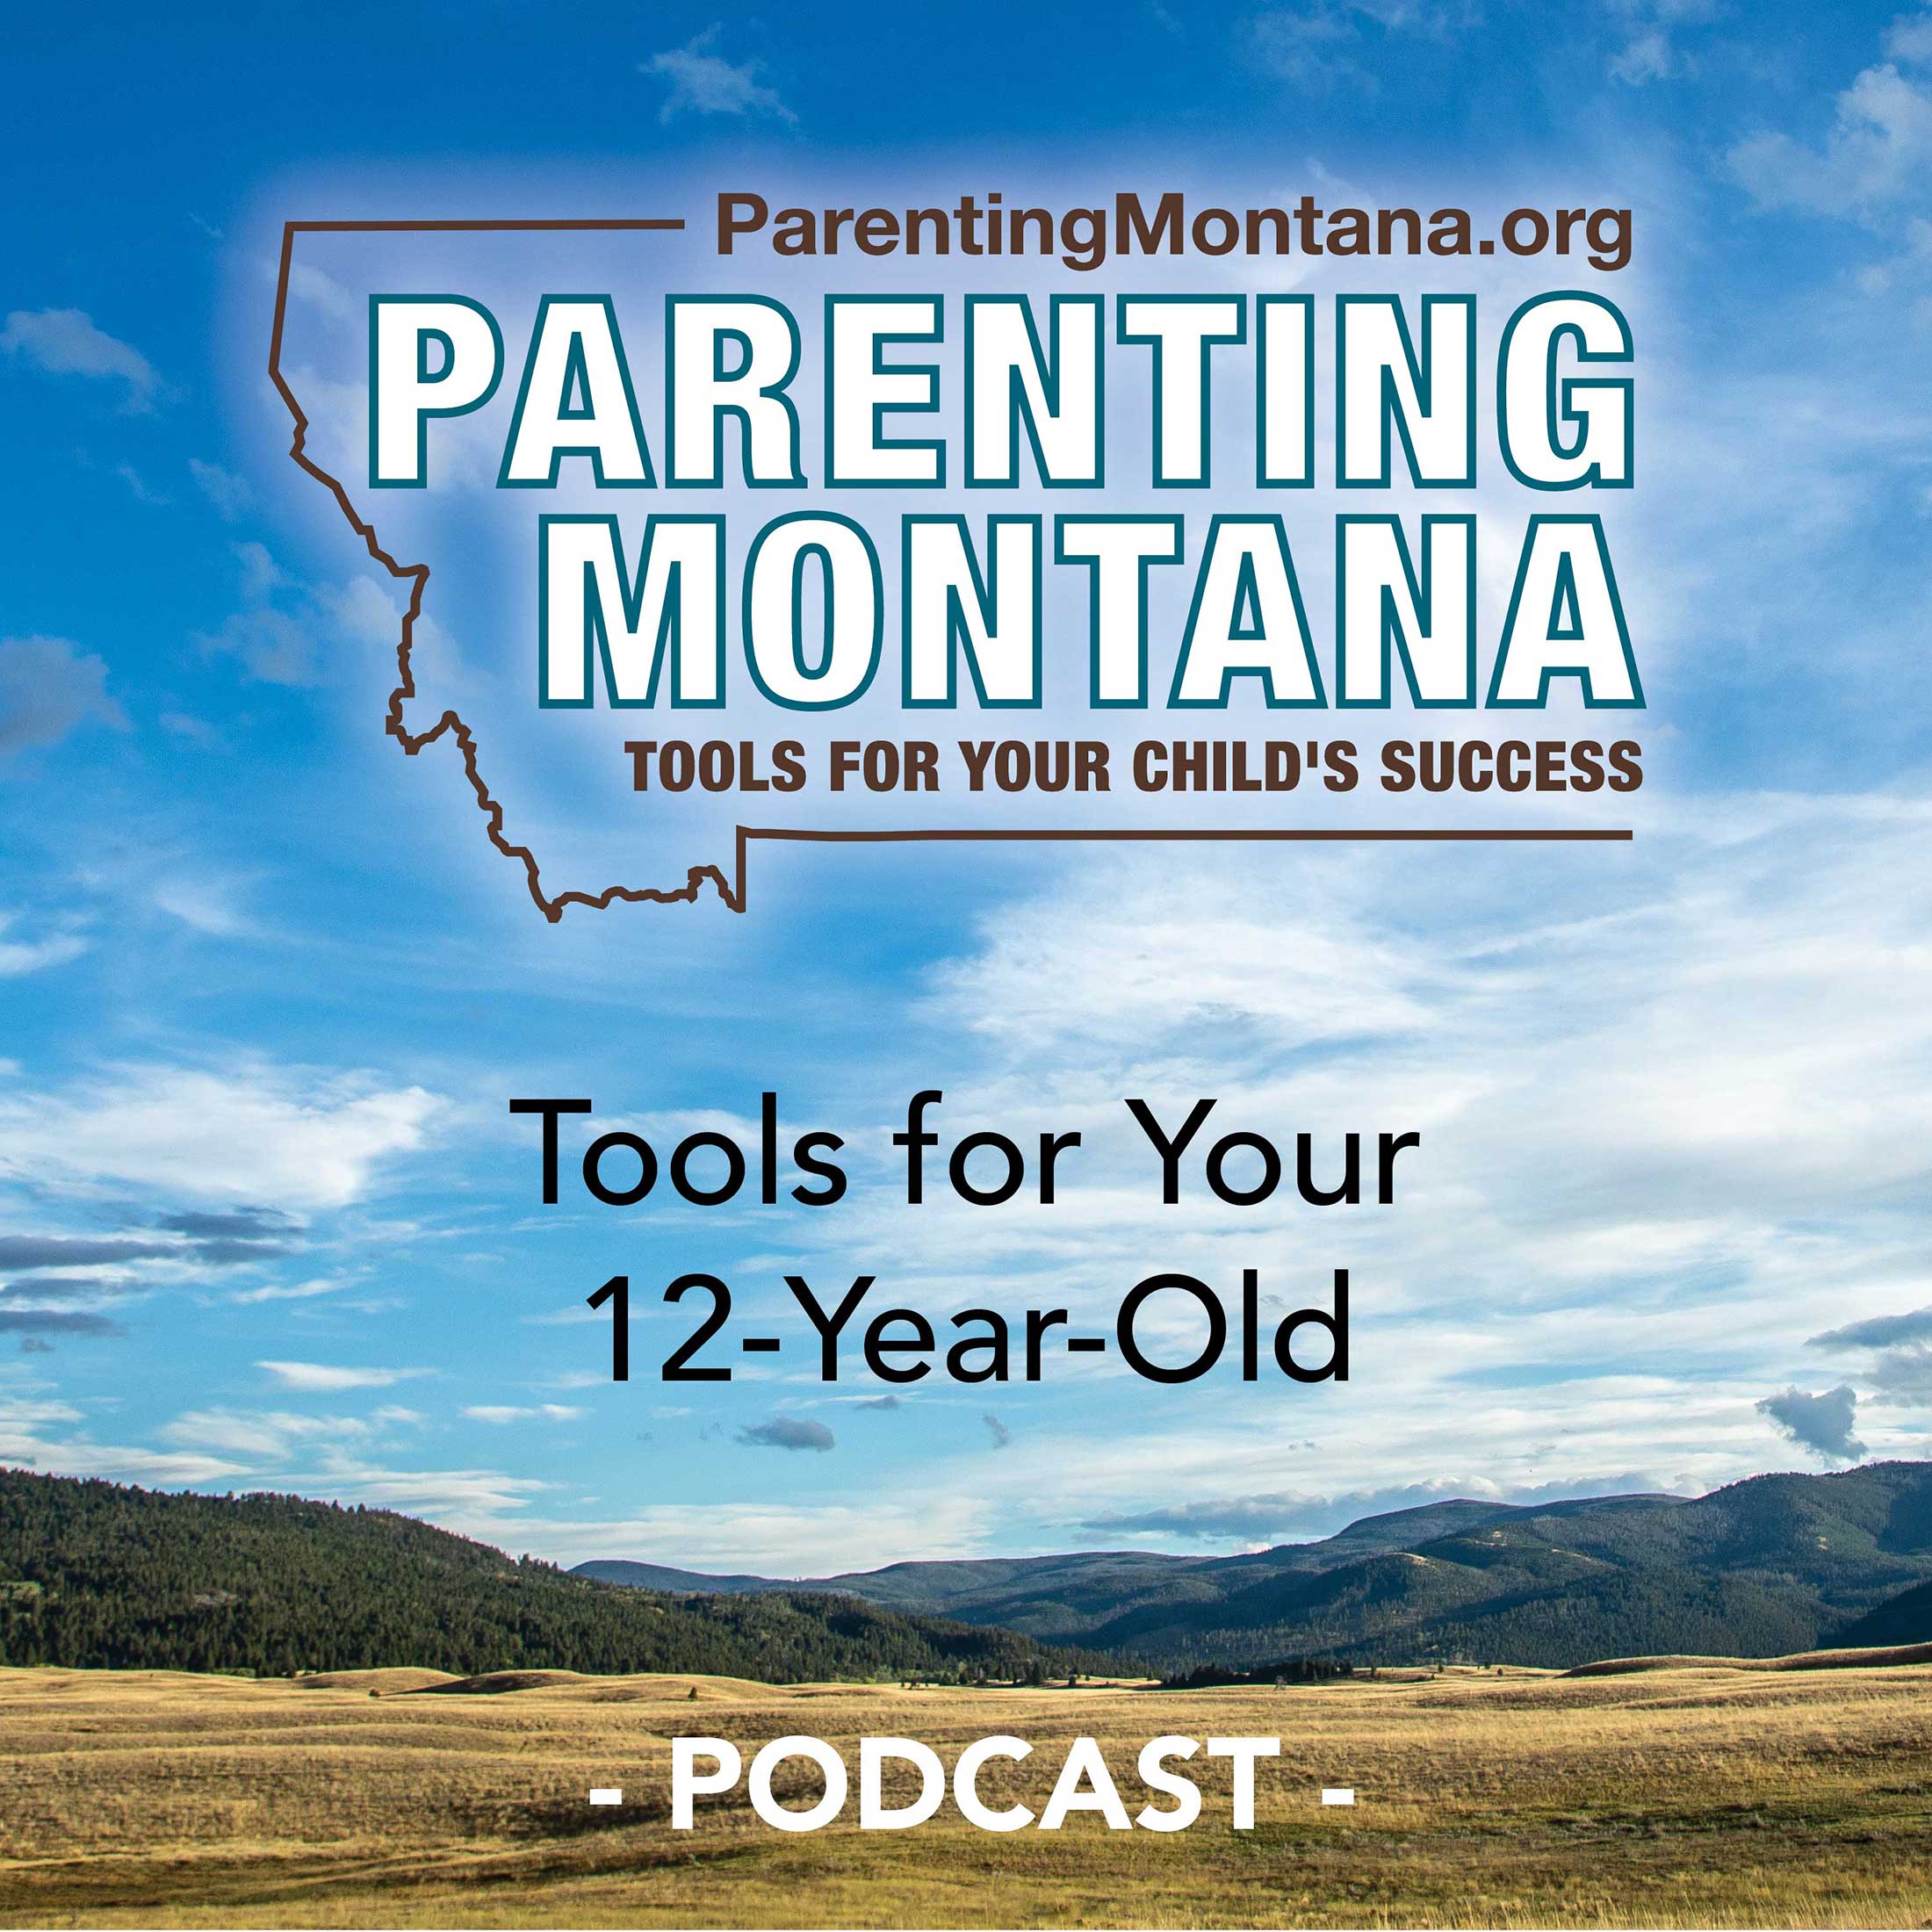 Artwork for podcast 12-Year-Old Parenting Montana Tools